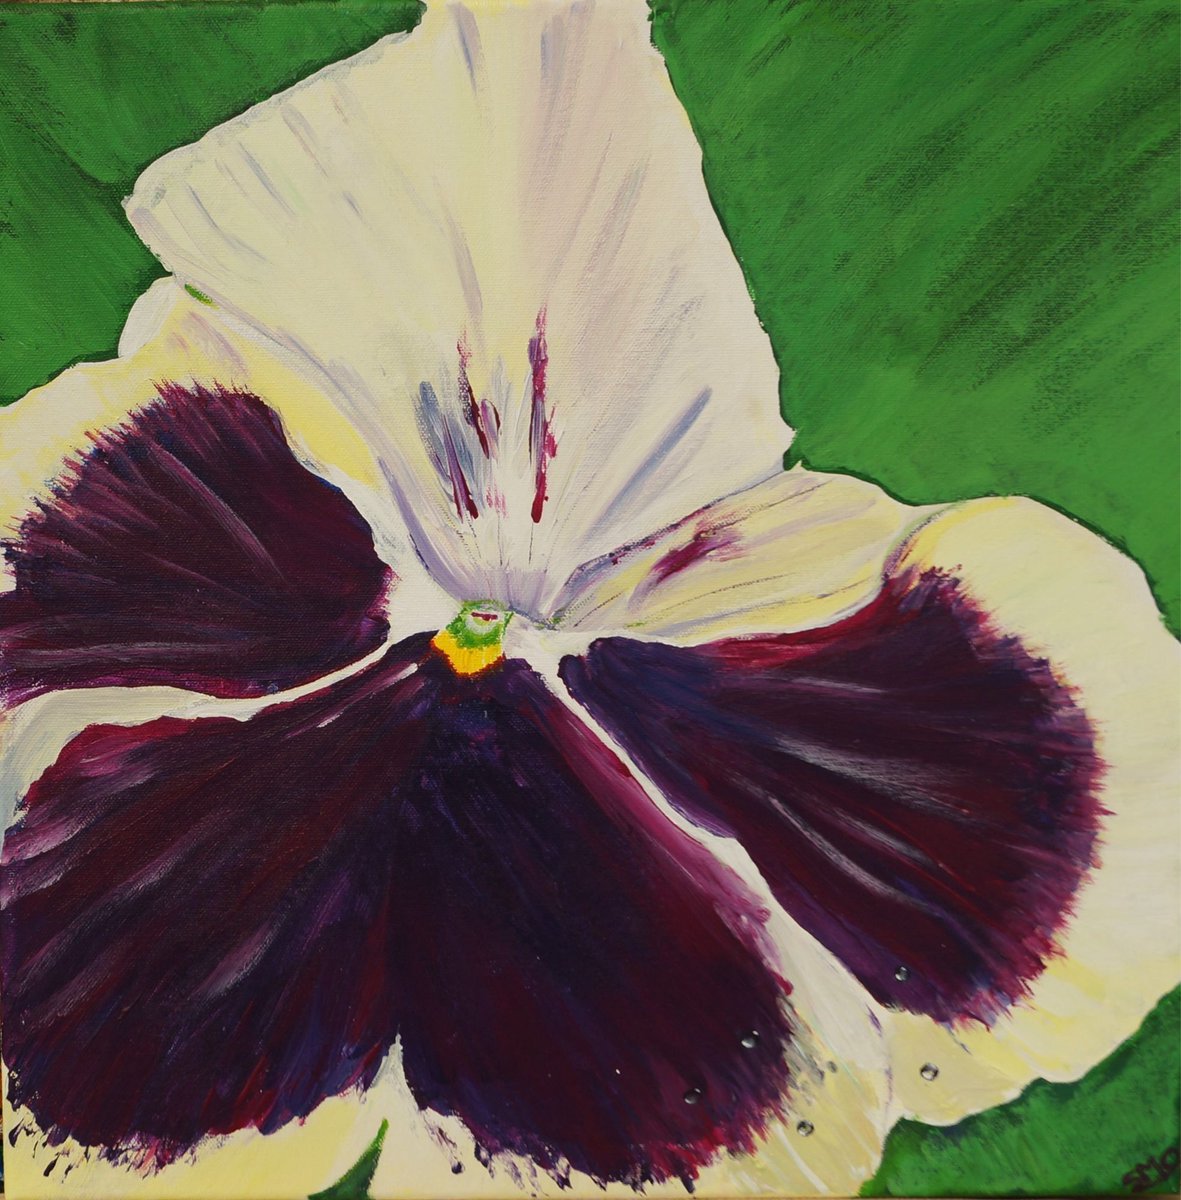 Original Pansy Painting There’s a touch of spring in the air 😄 Here’s a gift for flower lovers Pansy original painting on canvas just £45 with free shipping ! Link in comments #UKGiftHour